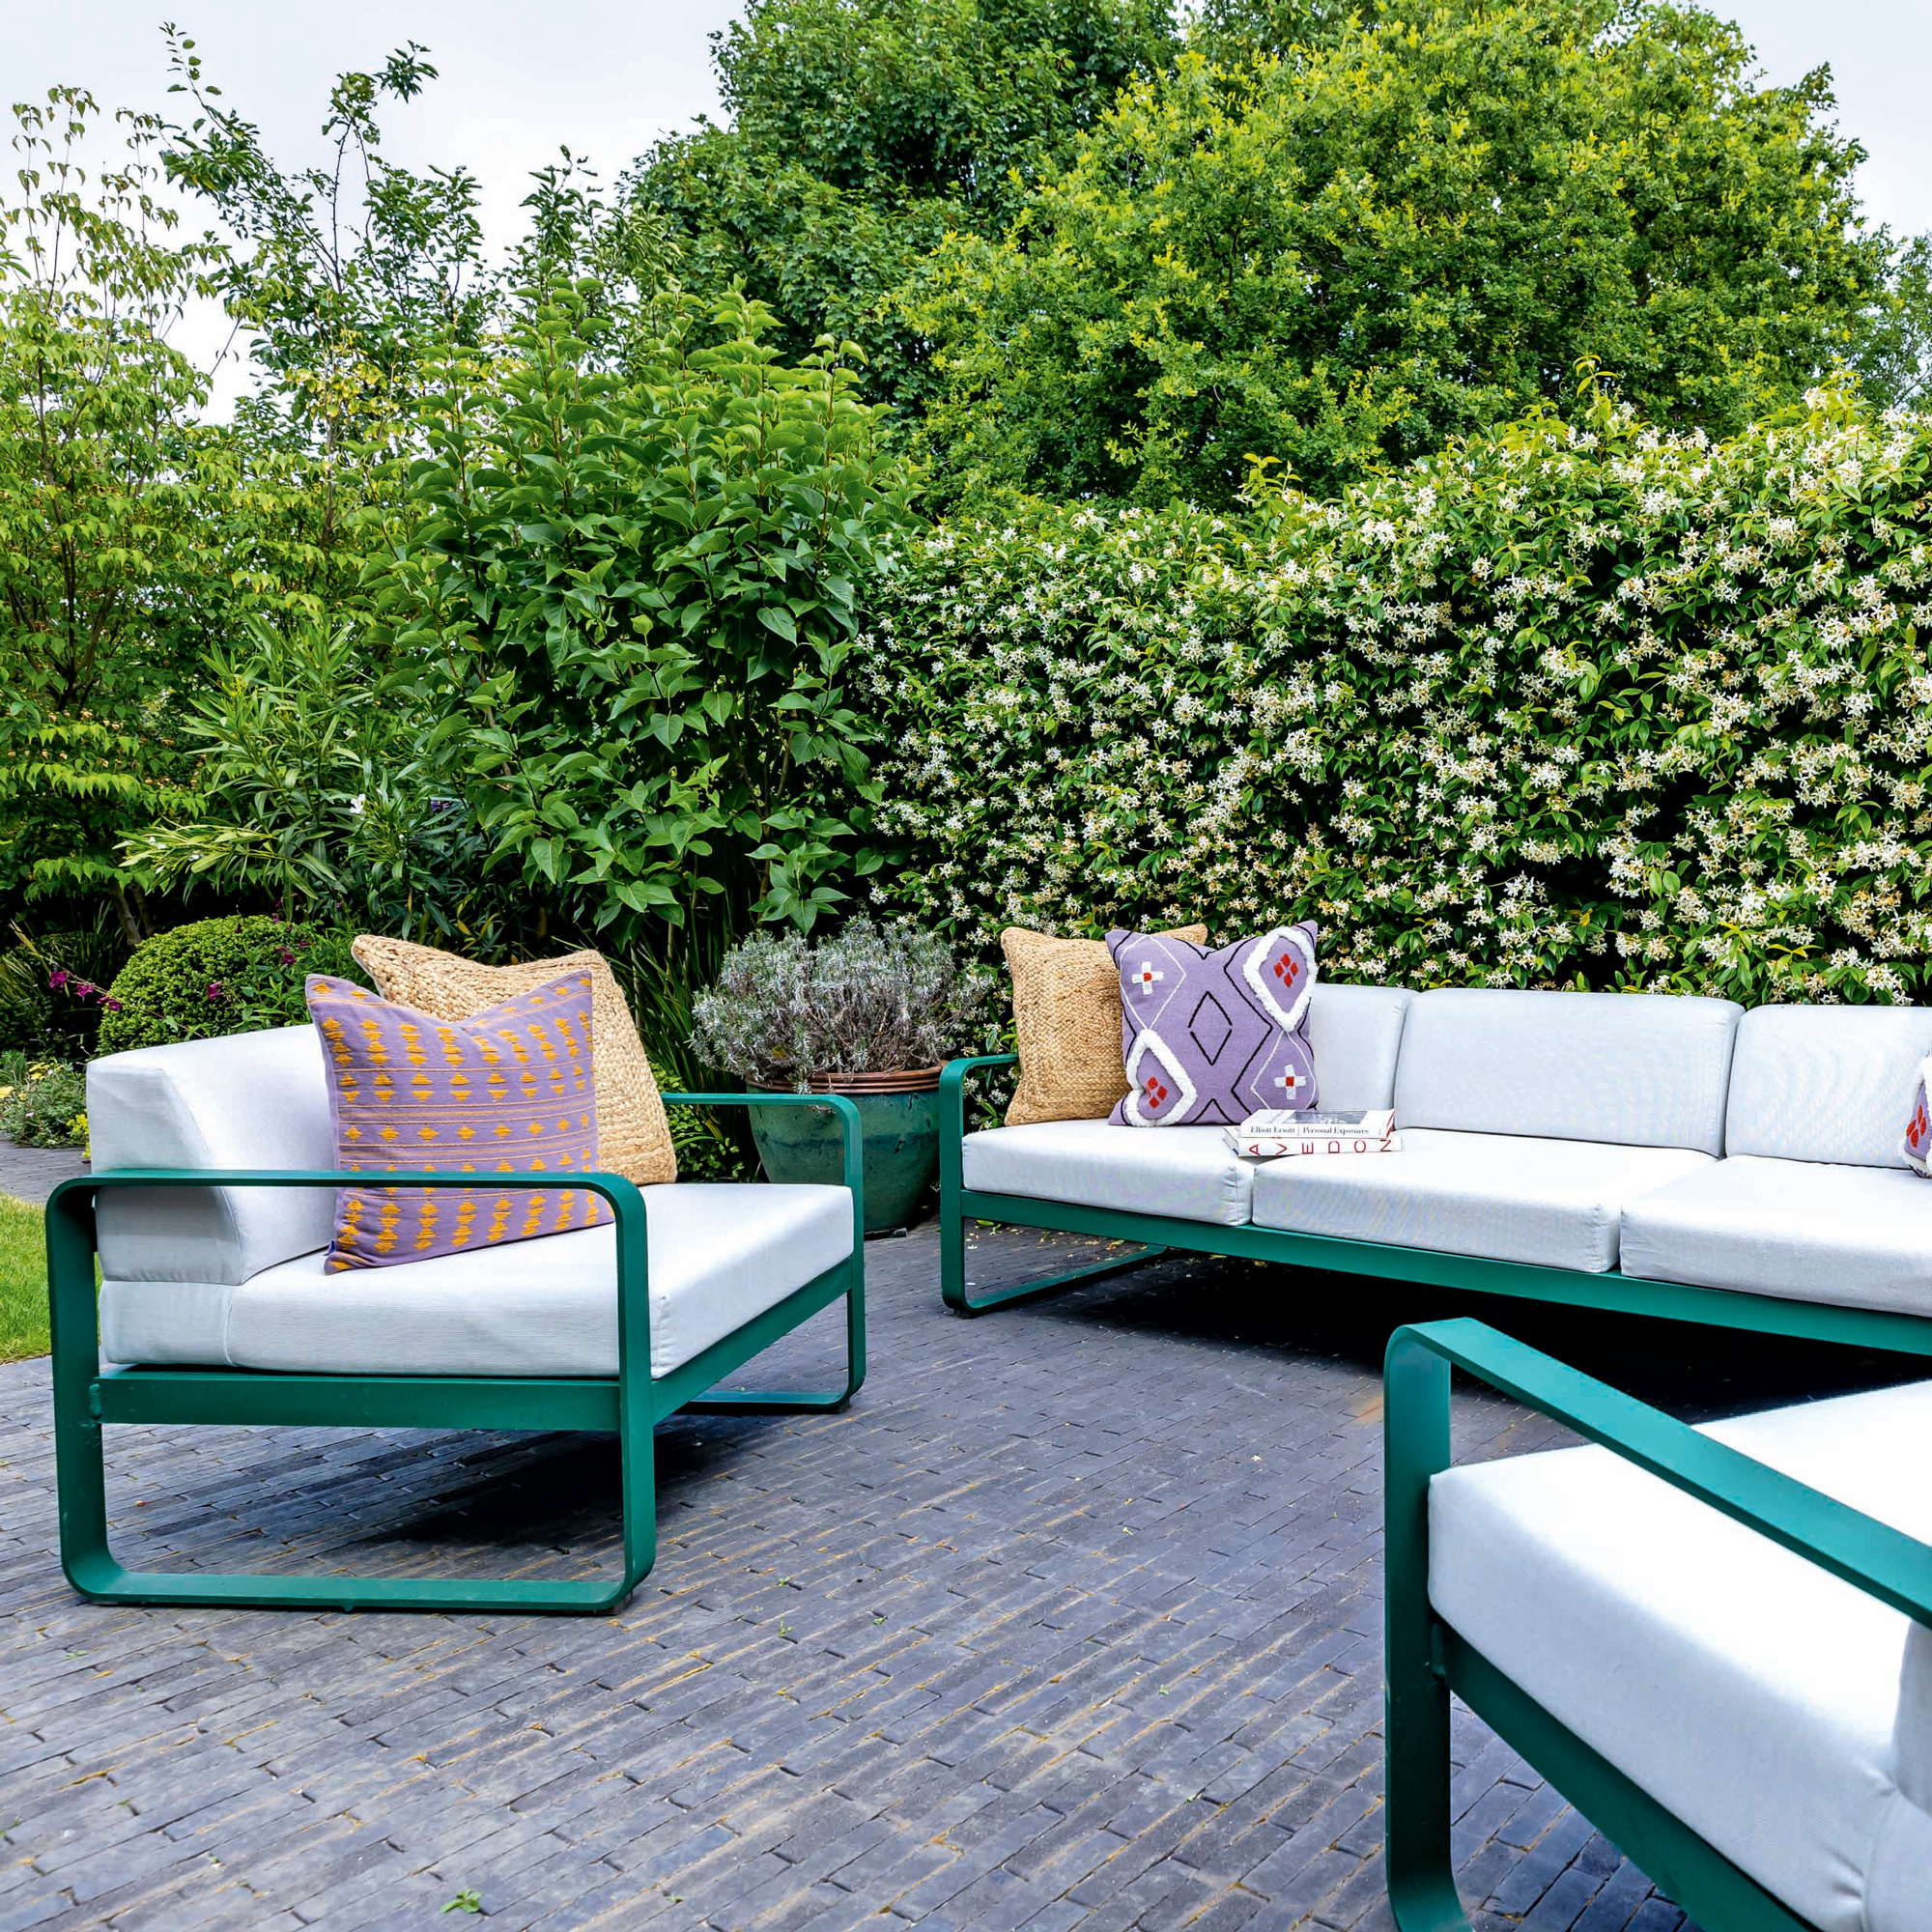 garden makeover with green and white outdoor sofa and armchairs on a grey tiled patio